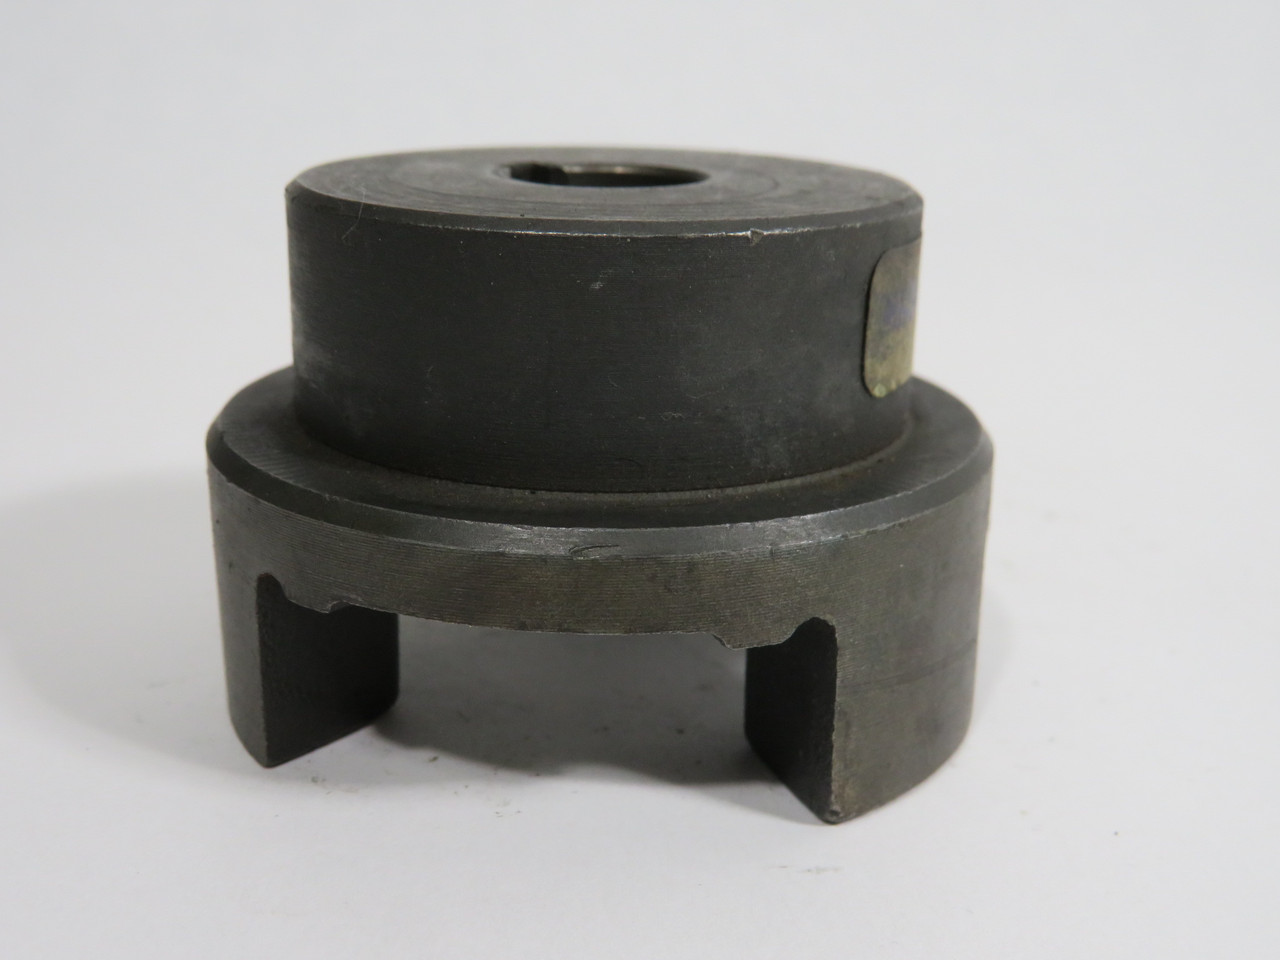 Cisco Jaw Coupling 5/8" Bore USED